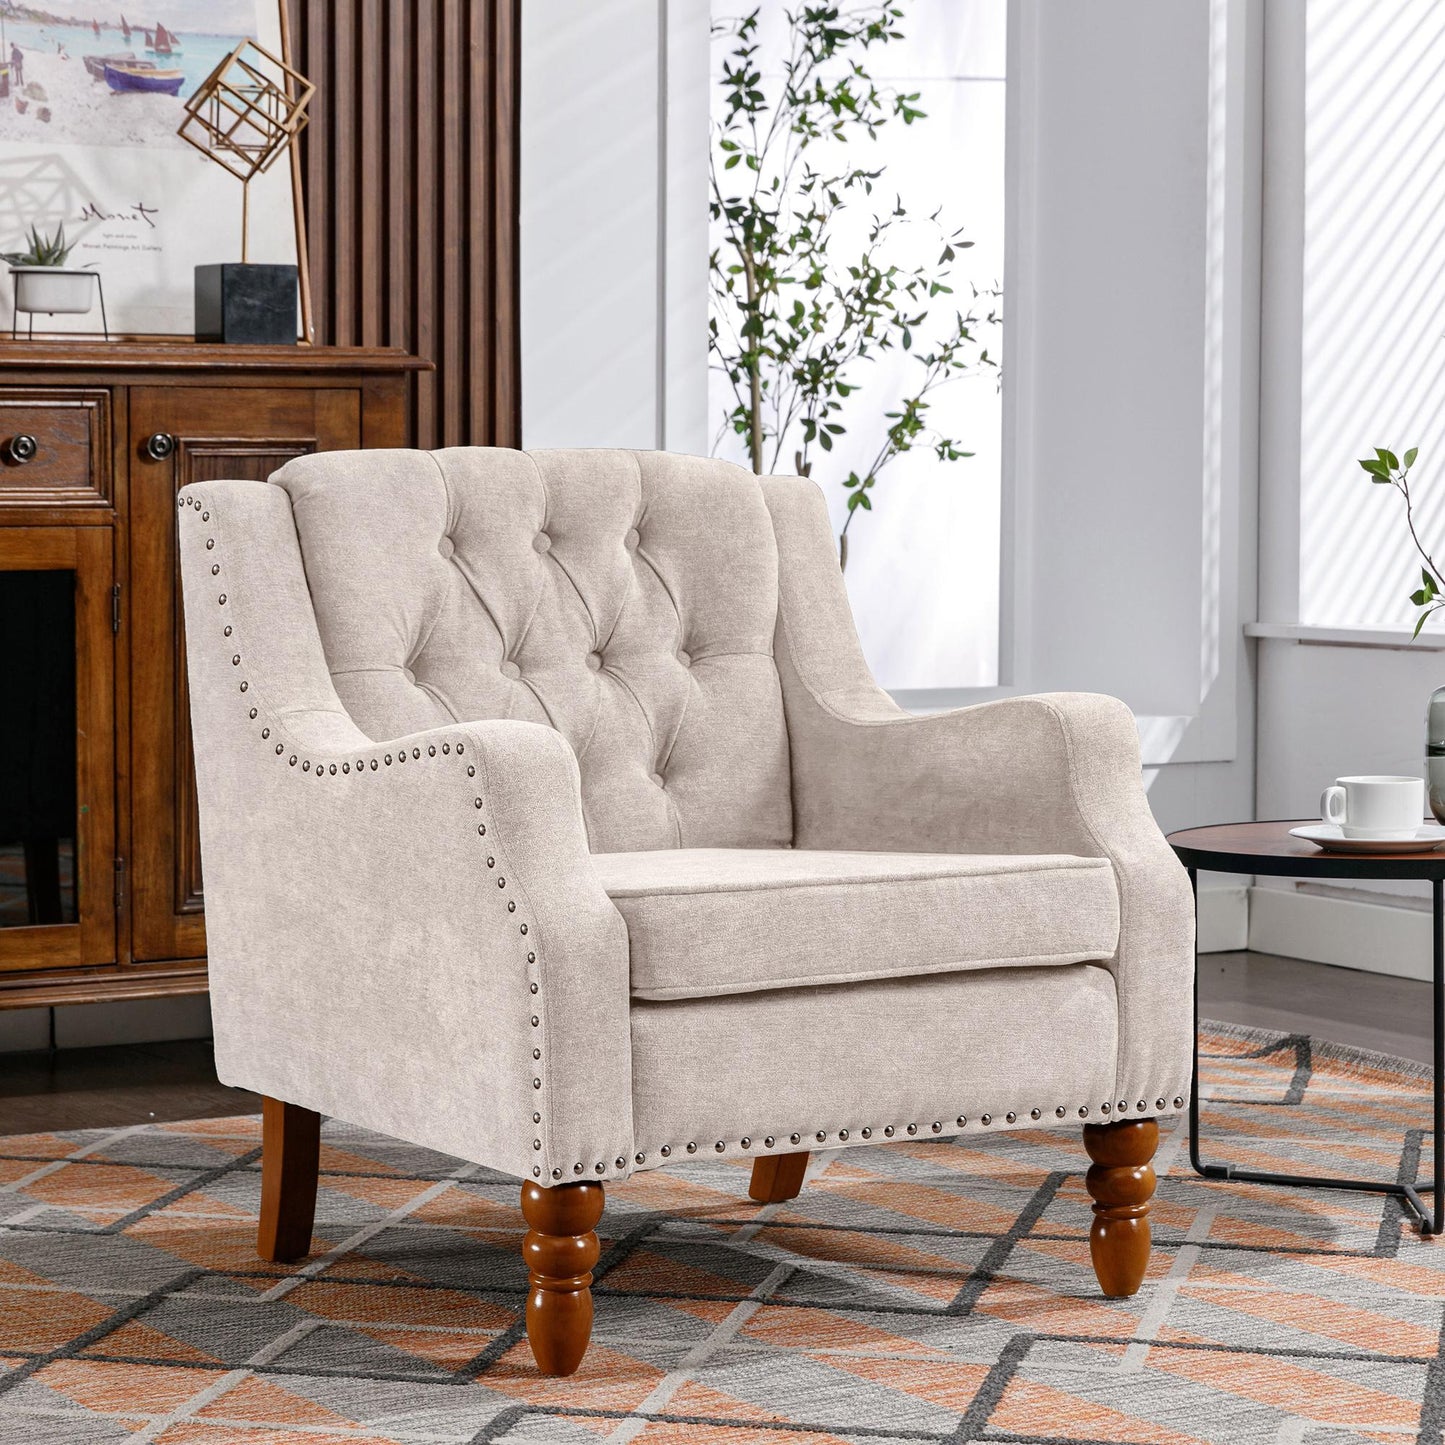 Regal Retreat Tufted Upholstered Armchair